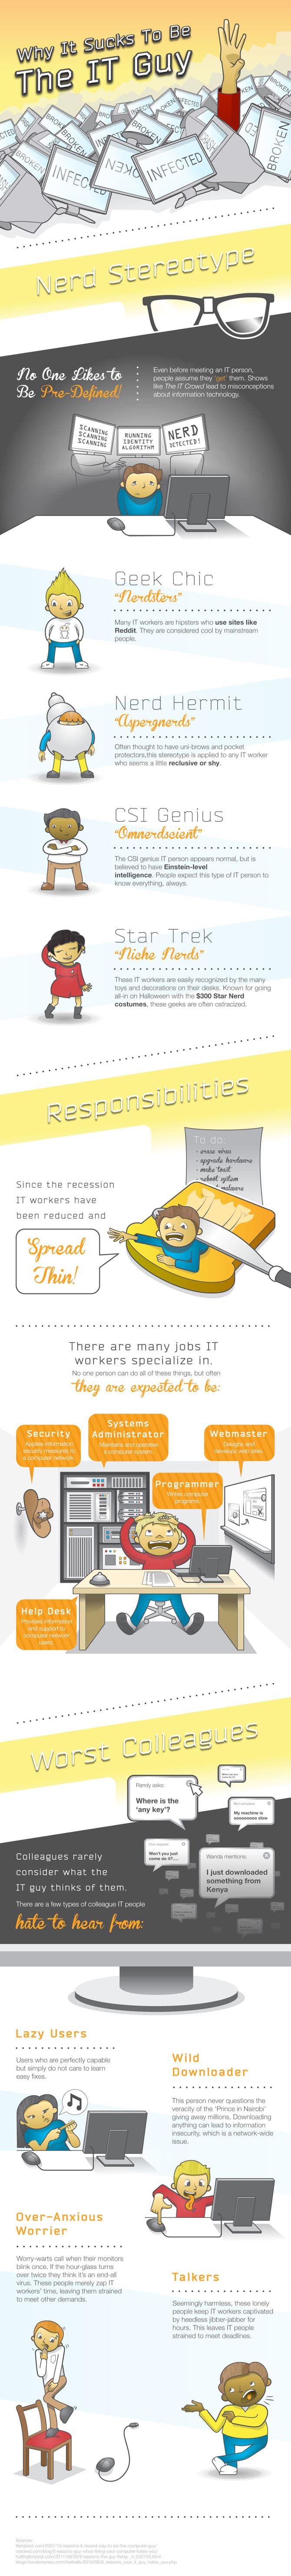 Why You Should Be Nice To Your IT Guy Today [Infographic]